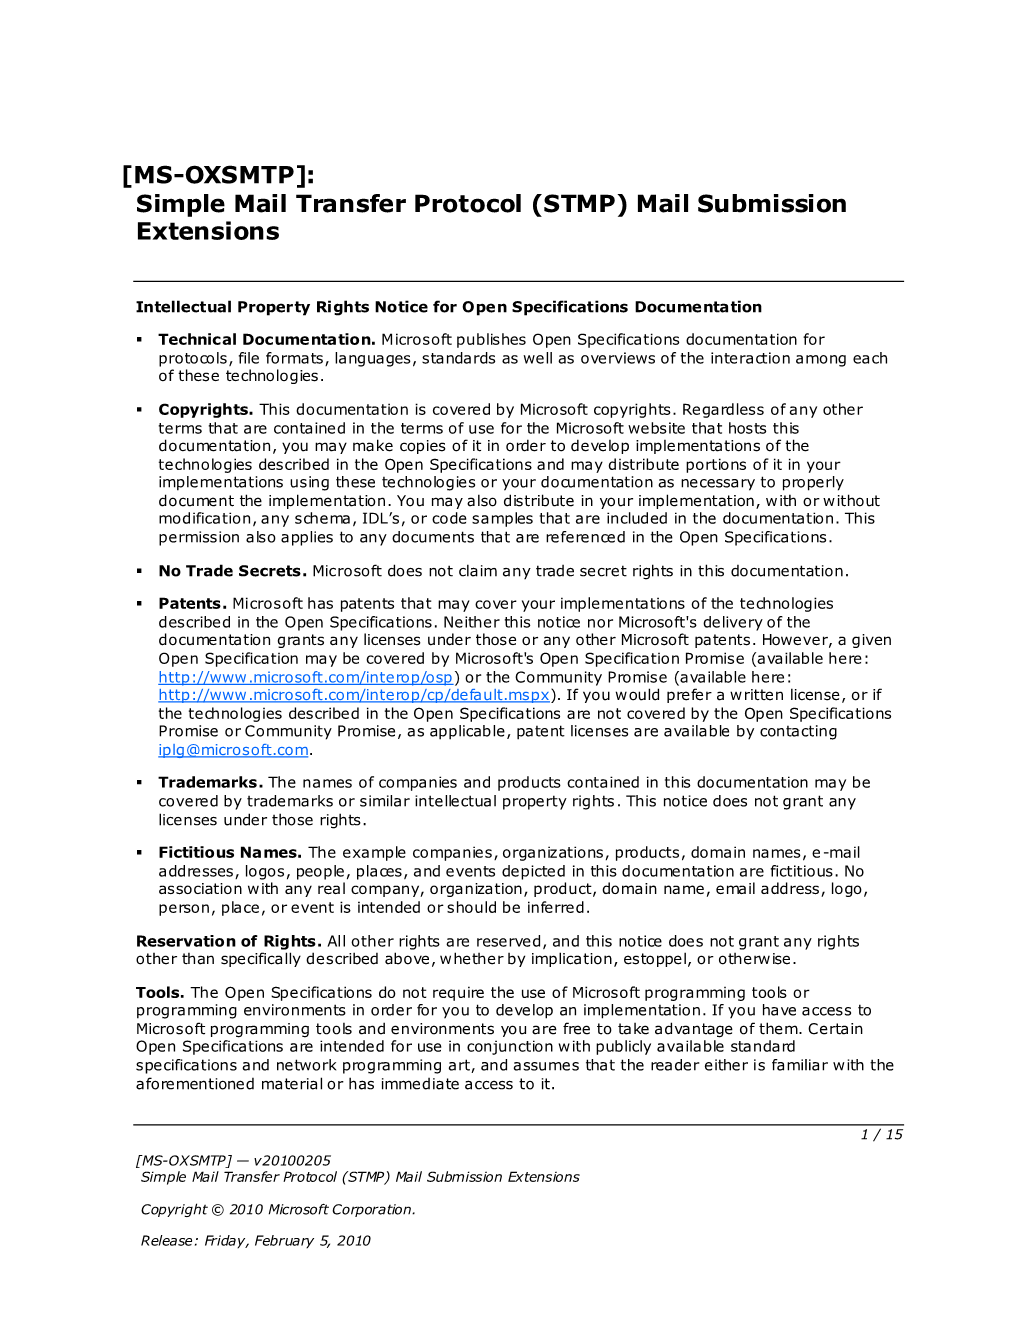 [MS-OXSMTP]: Simple Mail Transfer Protocol (STMP) Mail Submission Extensions